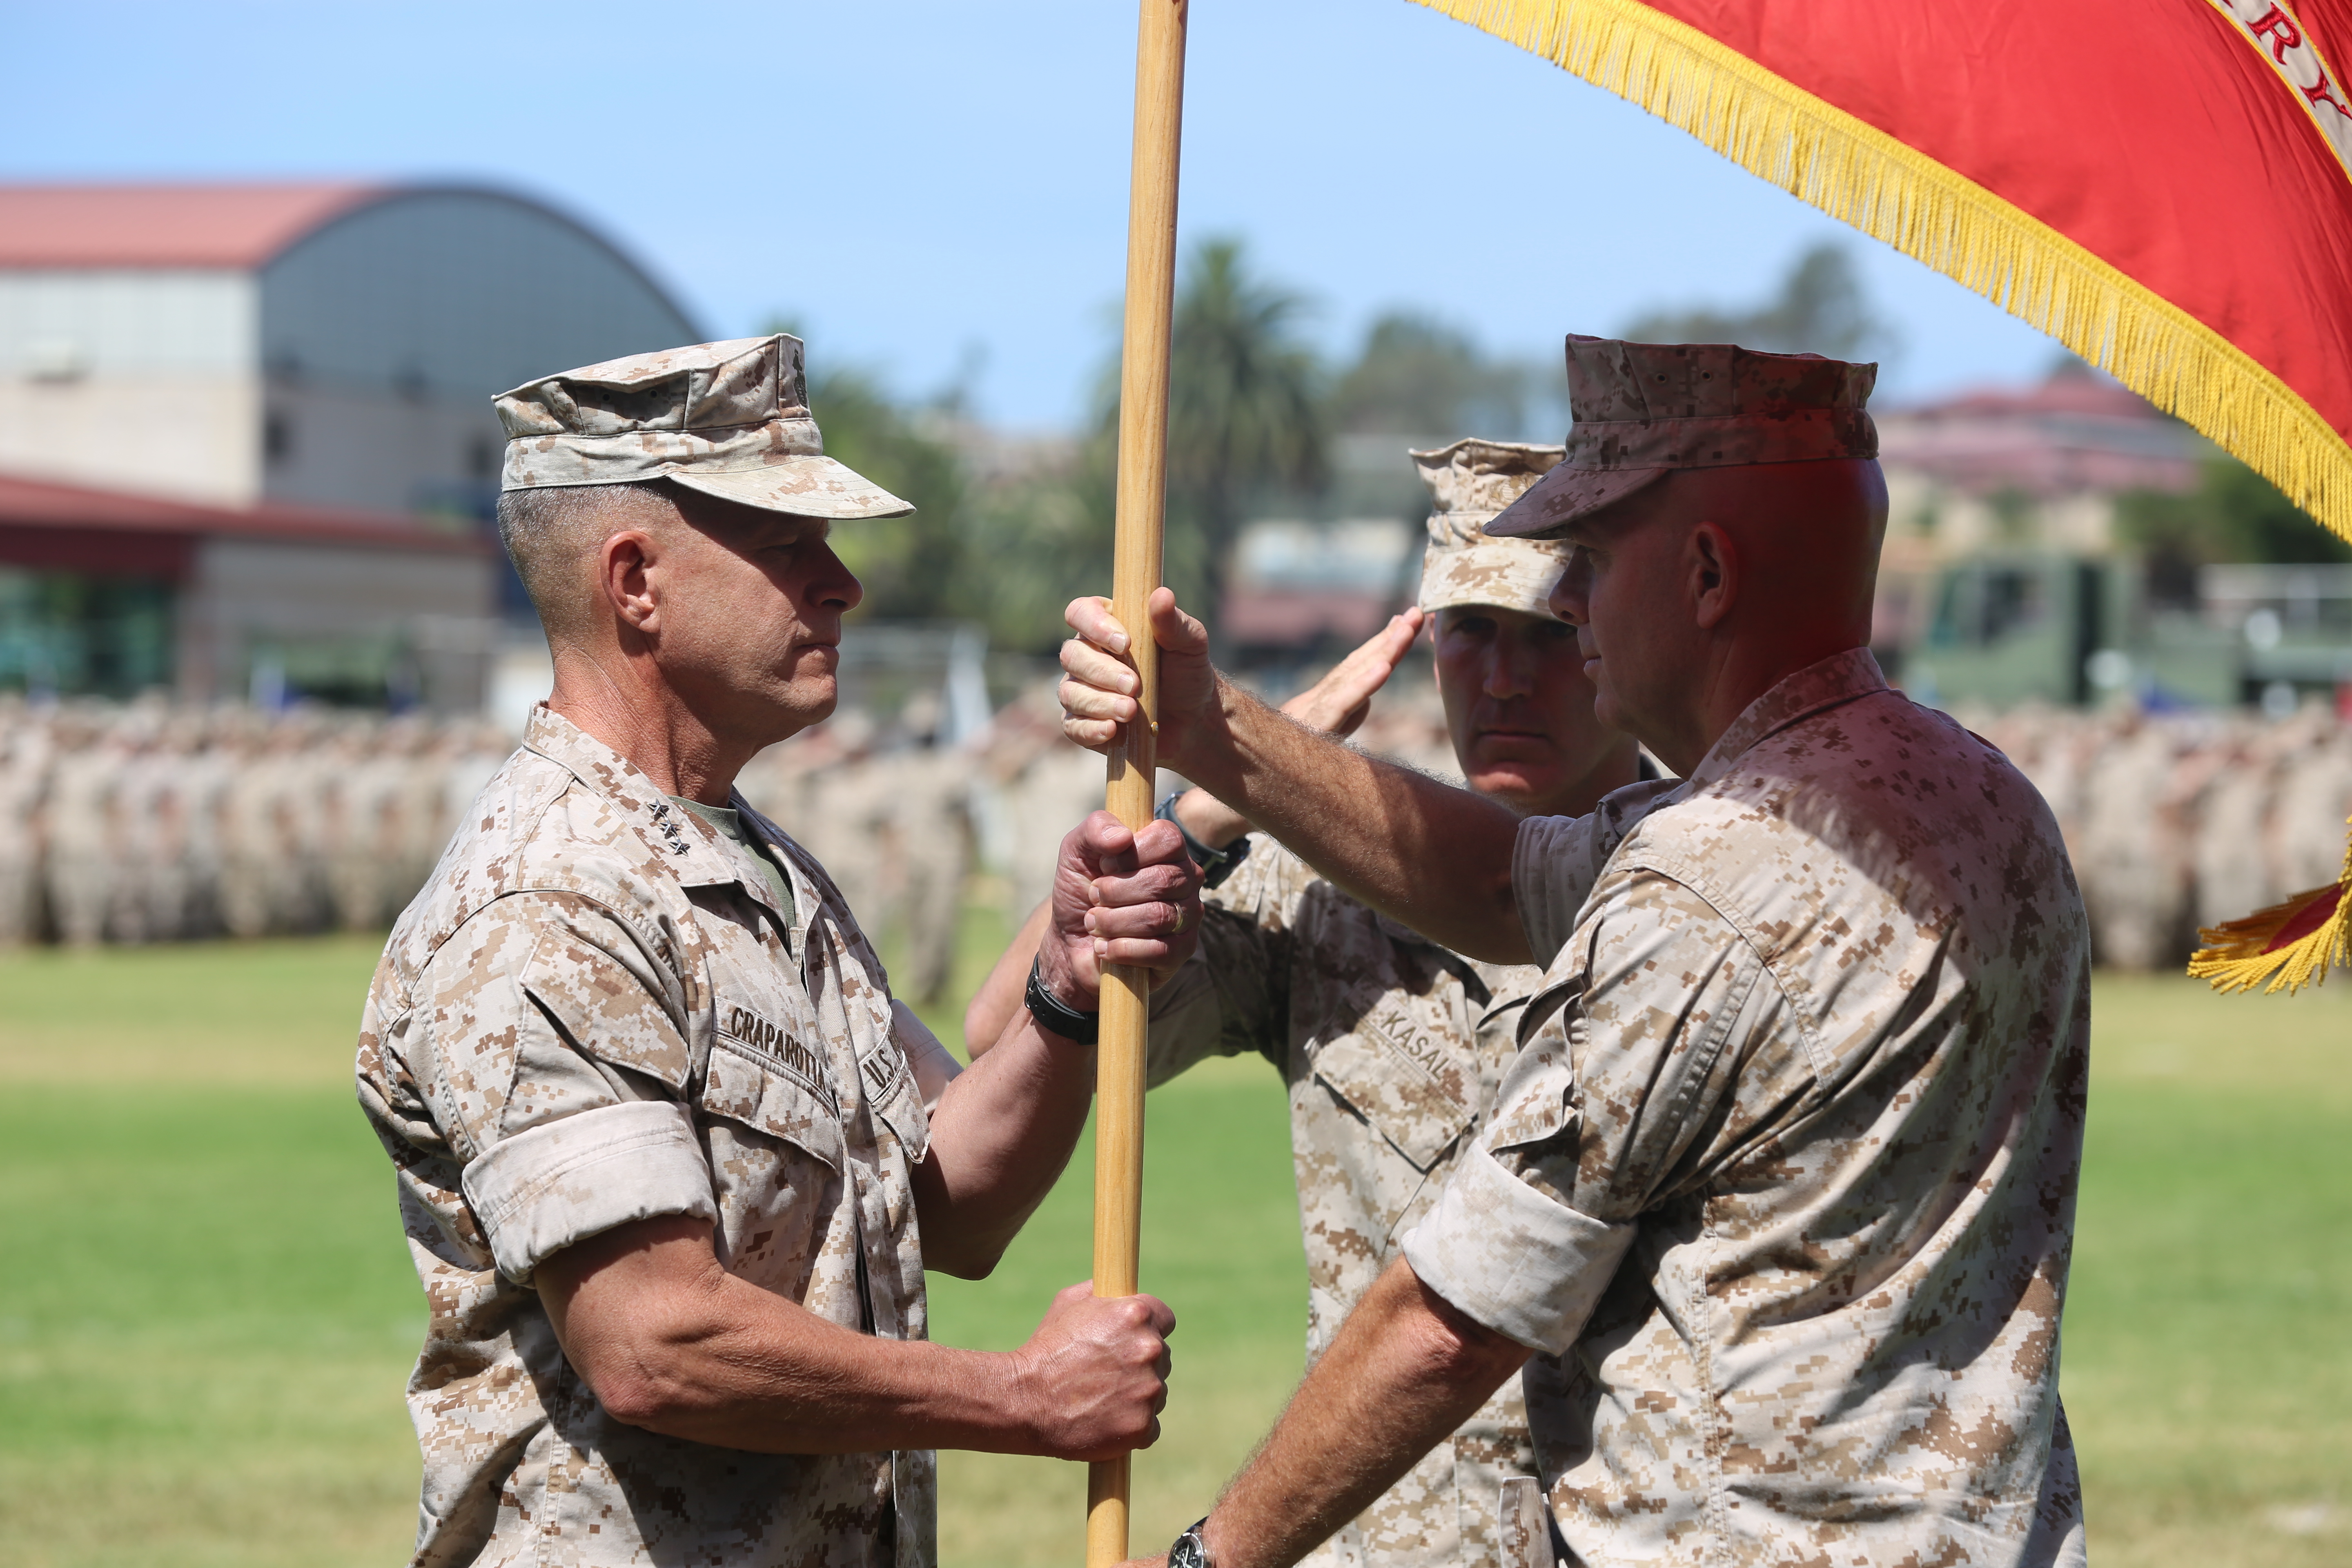 Lt. Gen. David H. Berger, the outgoing commanding general of I Marine Expeditionary Force, passes the unit colors to Lt. Gen. Lewis A. Craparotta during a change of command ceremony at Camp Pendleton on July 27, 2016. US Marine Corps Photo